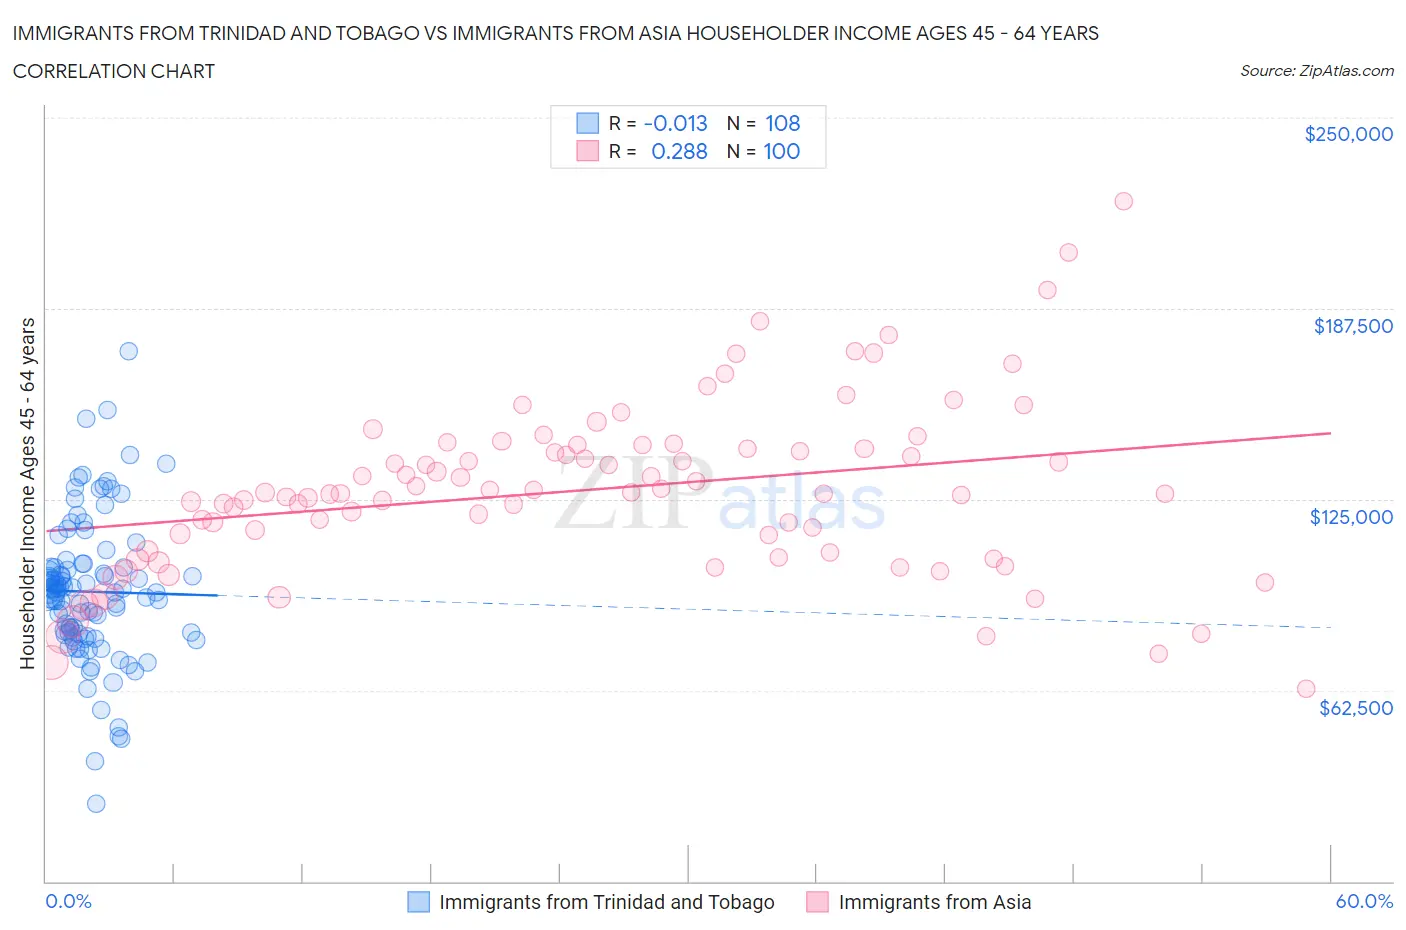 Immigrants from Trinidad and Tobago vs Immigrants from Asia Householder Income Ages 45 - 64 years